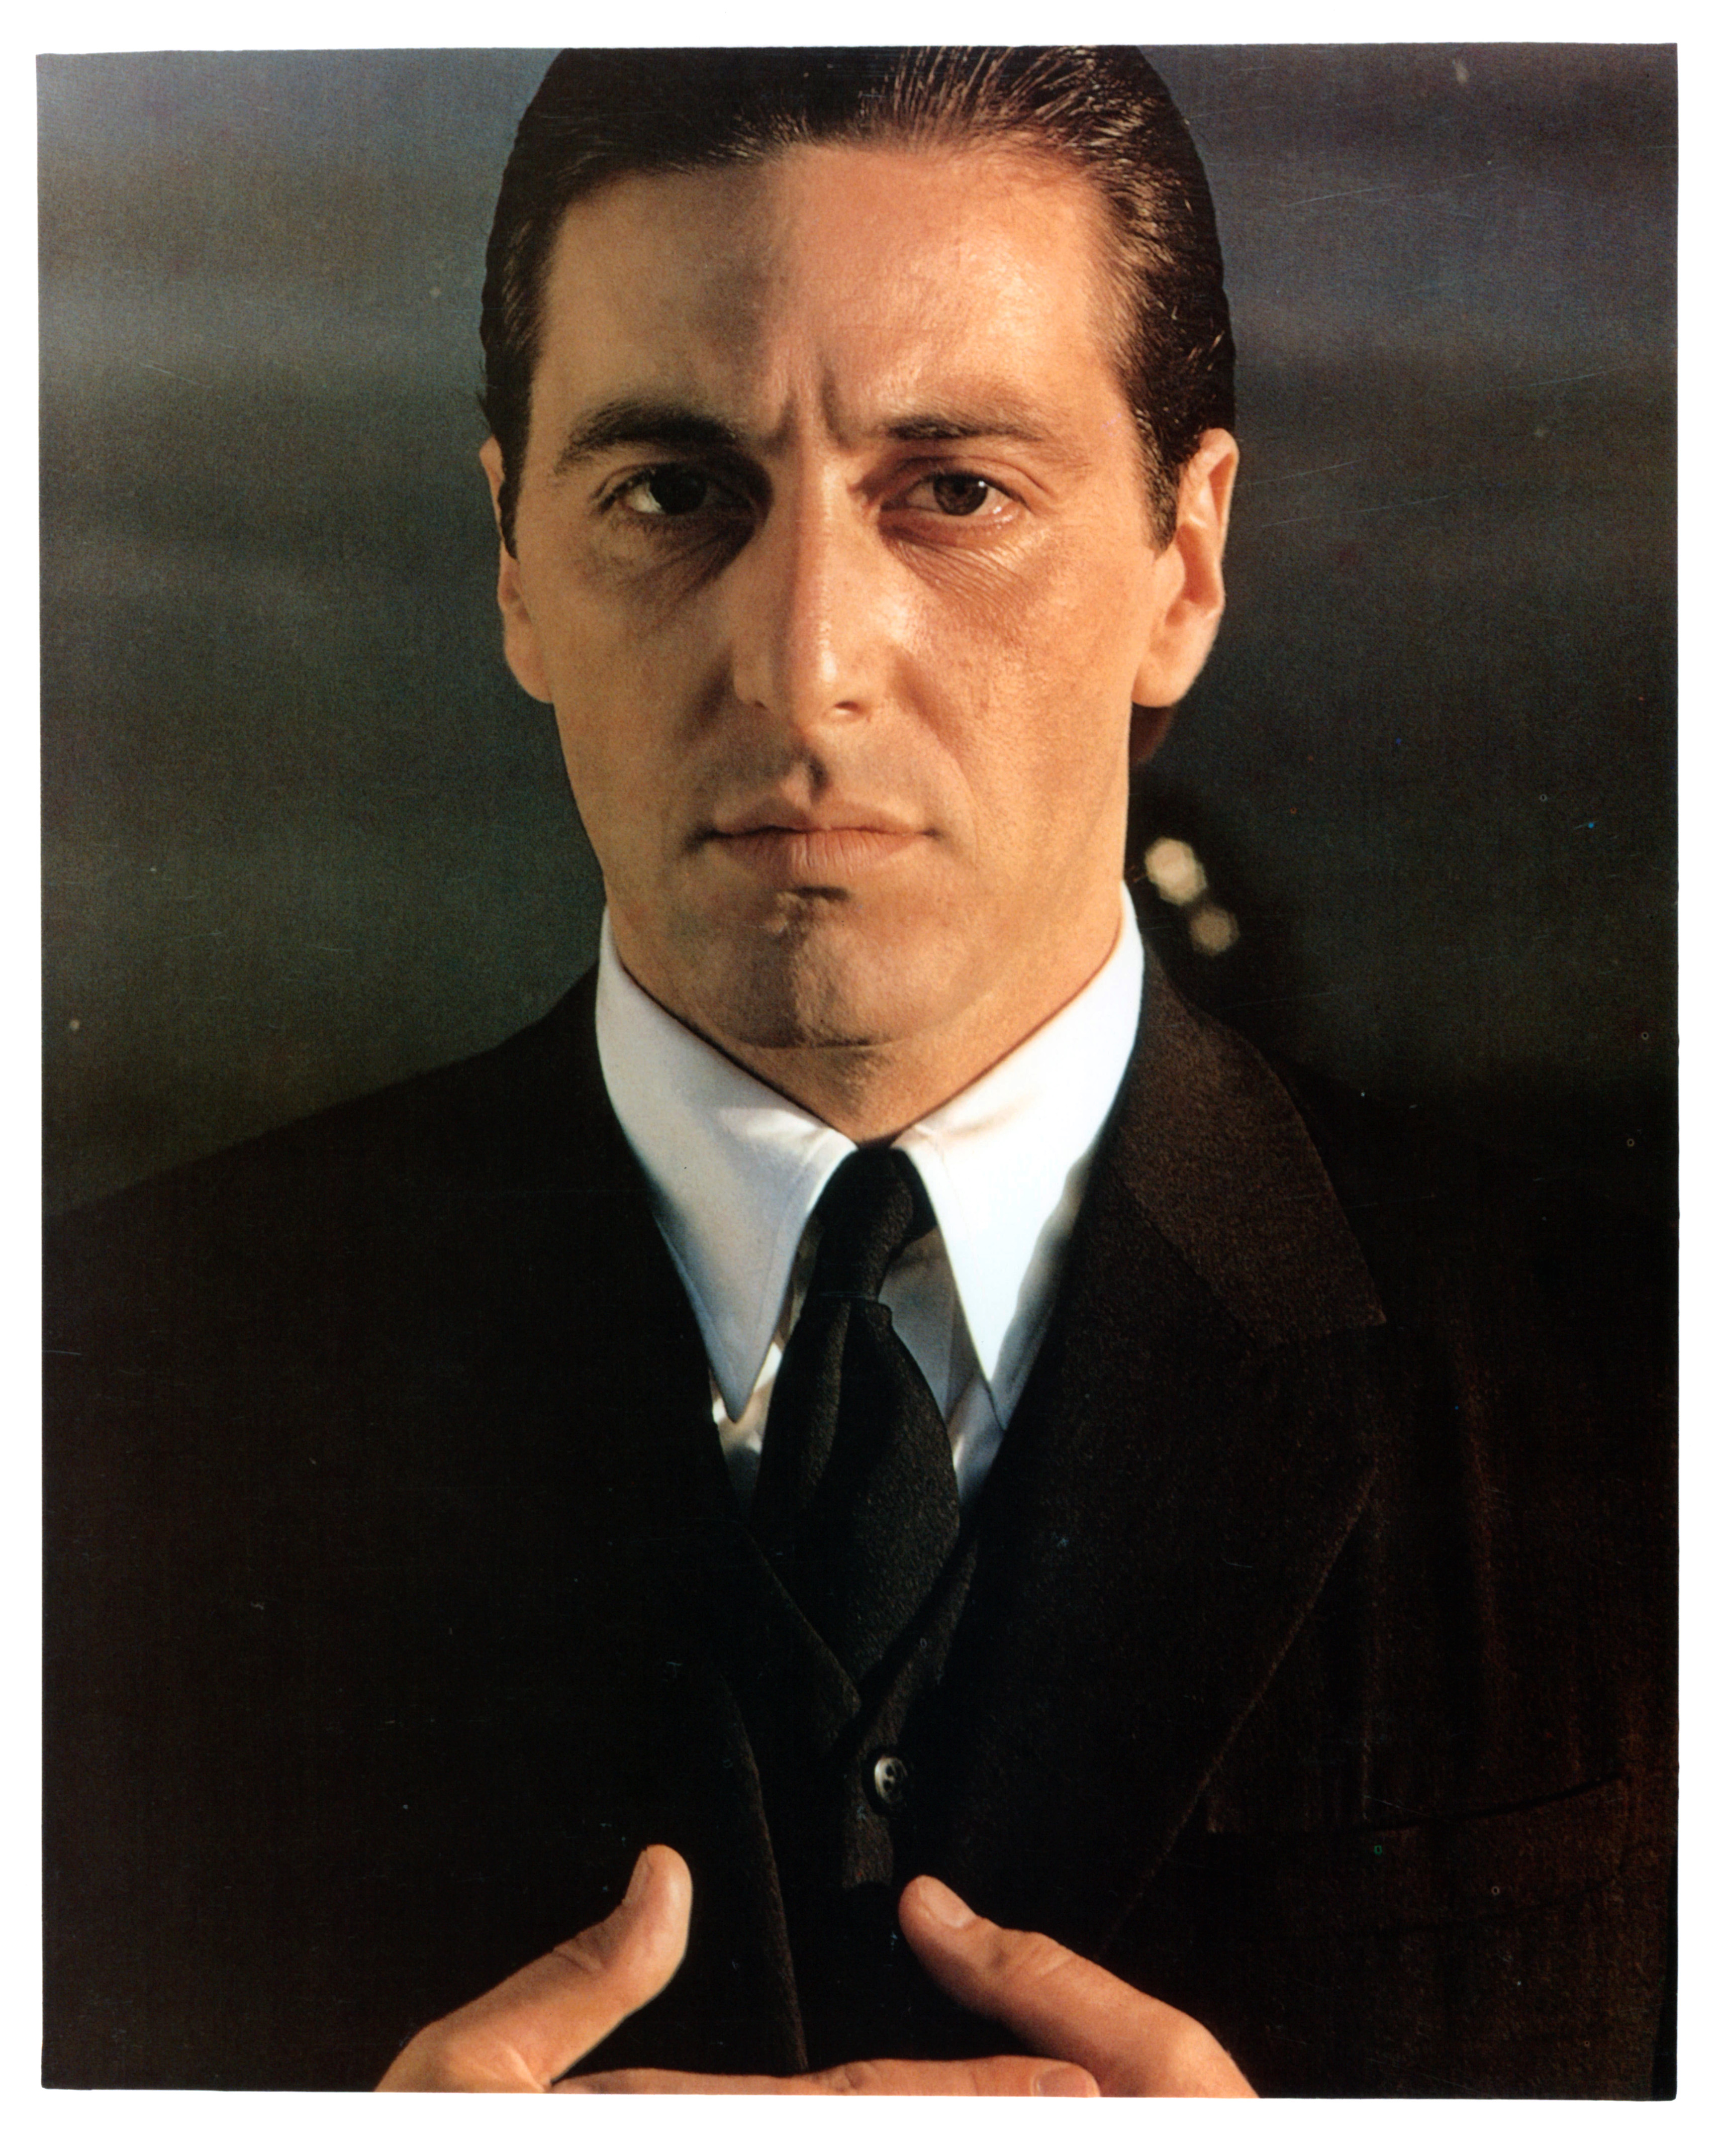 Al Pacino in a scene from the film 'The Godfather: Part II', 1974 | Source: Getty Images